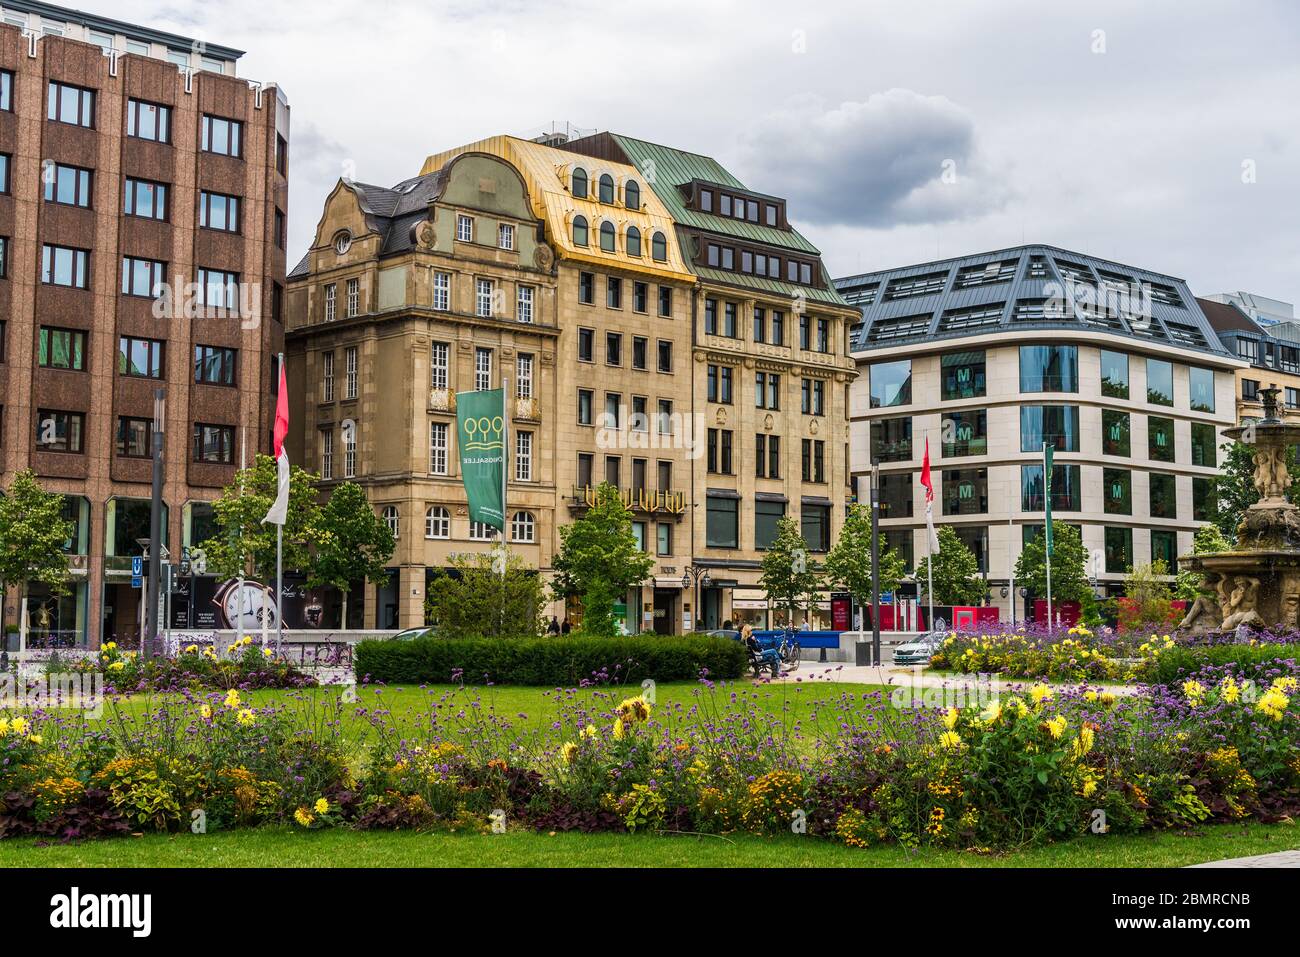 Dusseldorf, Germany - August 11, 2019: Buildings with German architecture Stock Photo